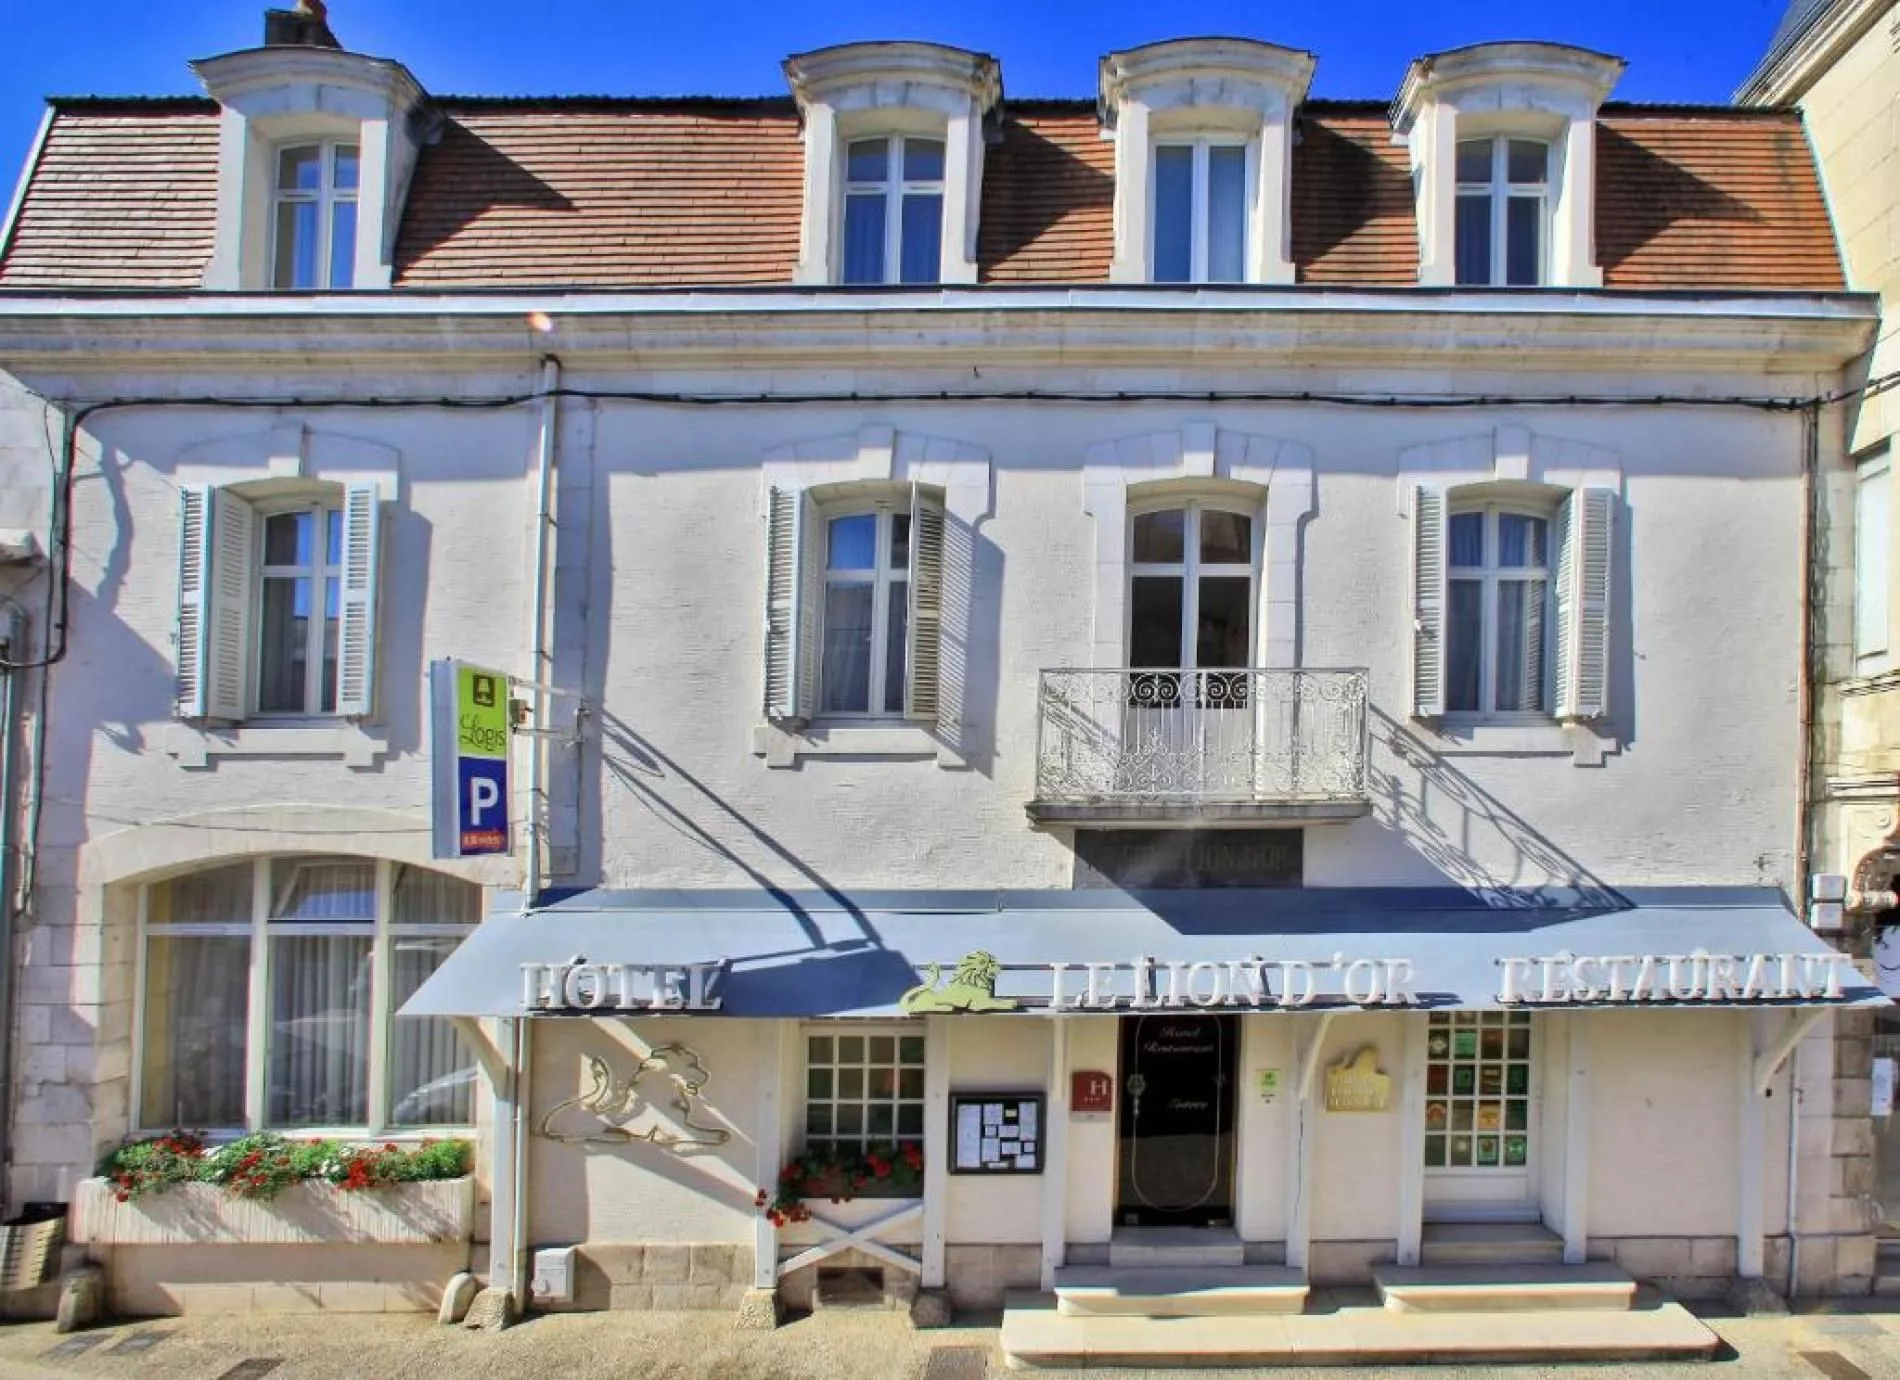 Logis hotel in Chauvigny